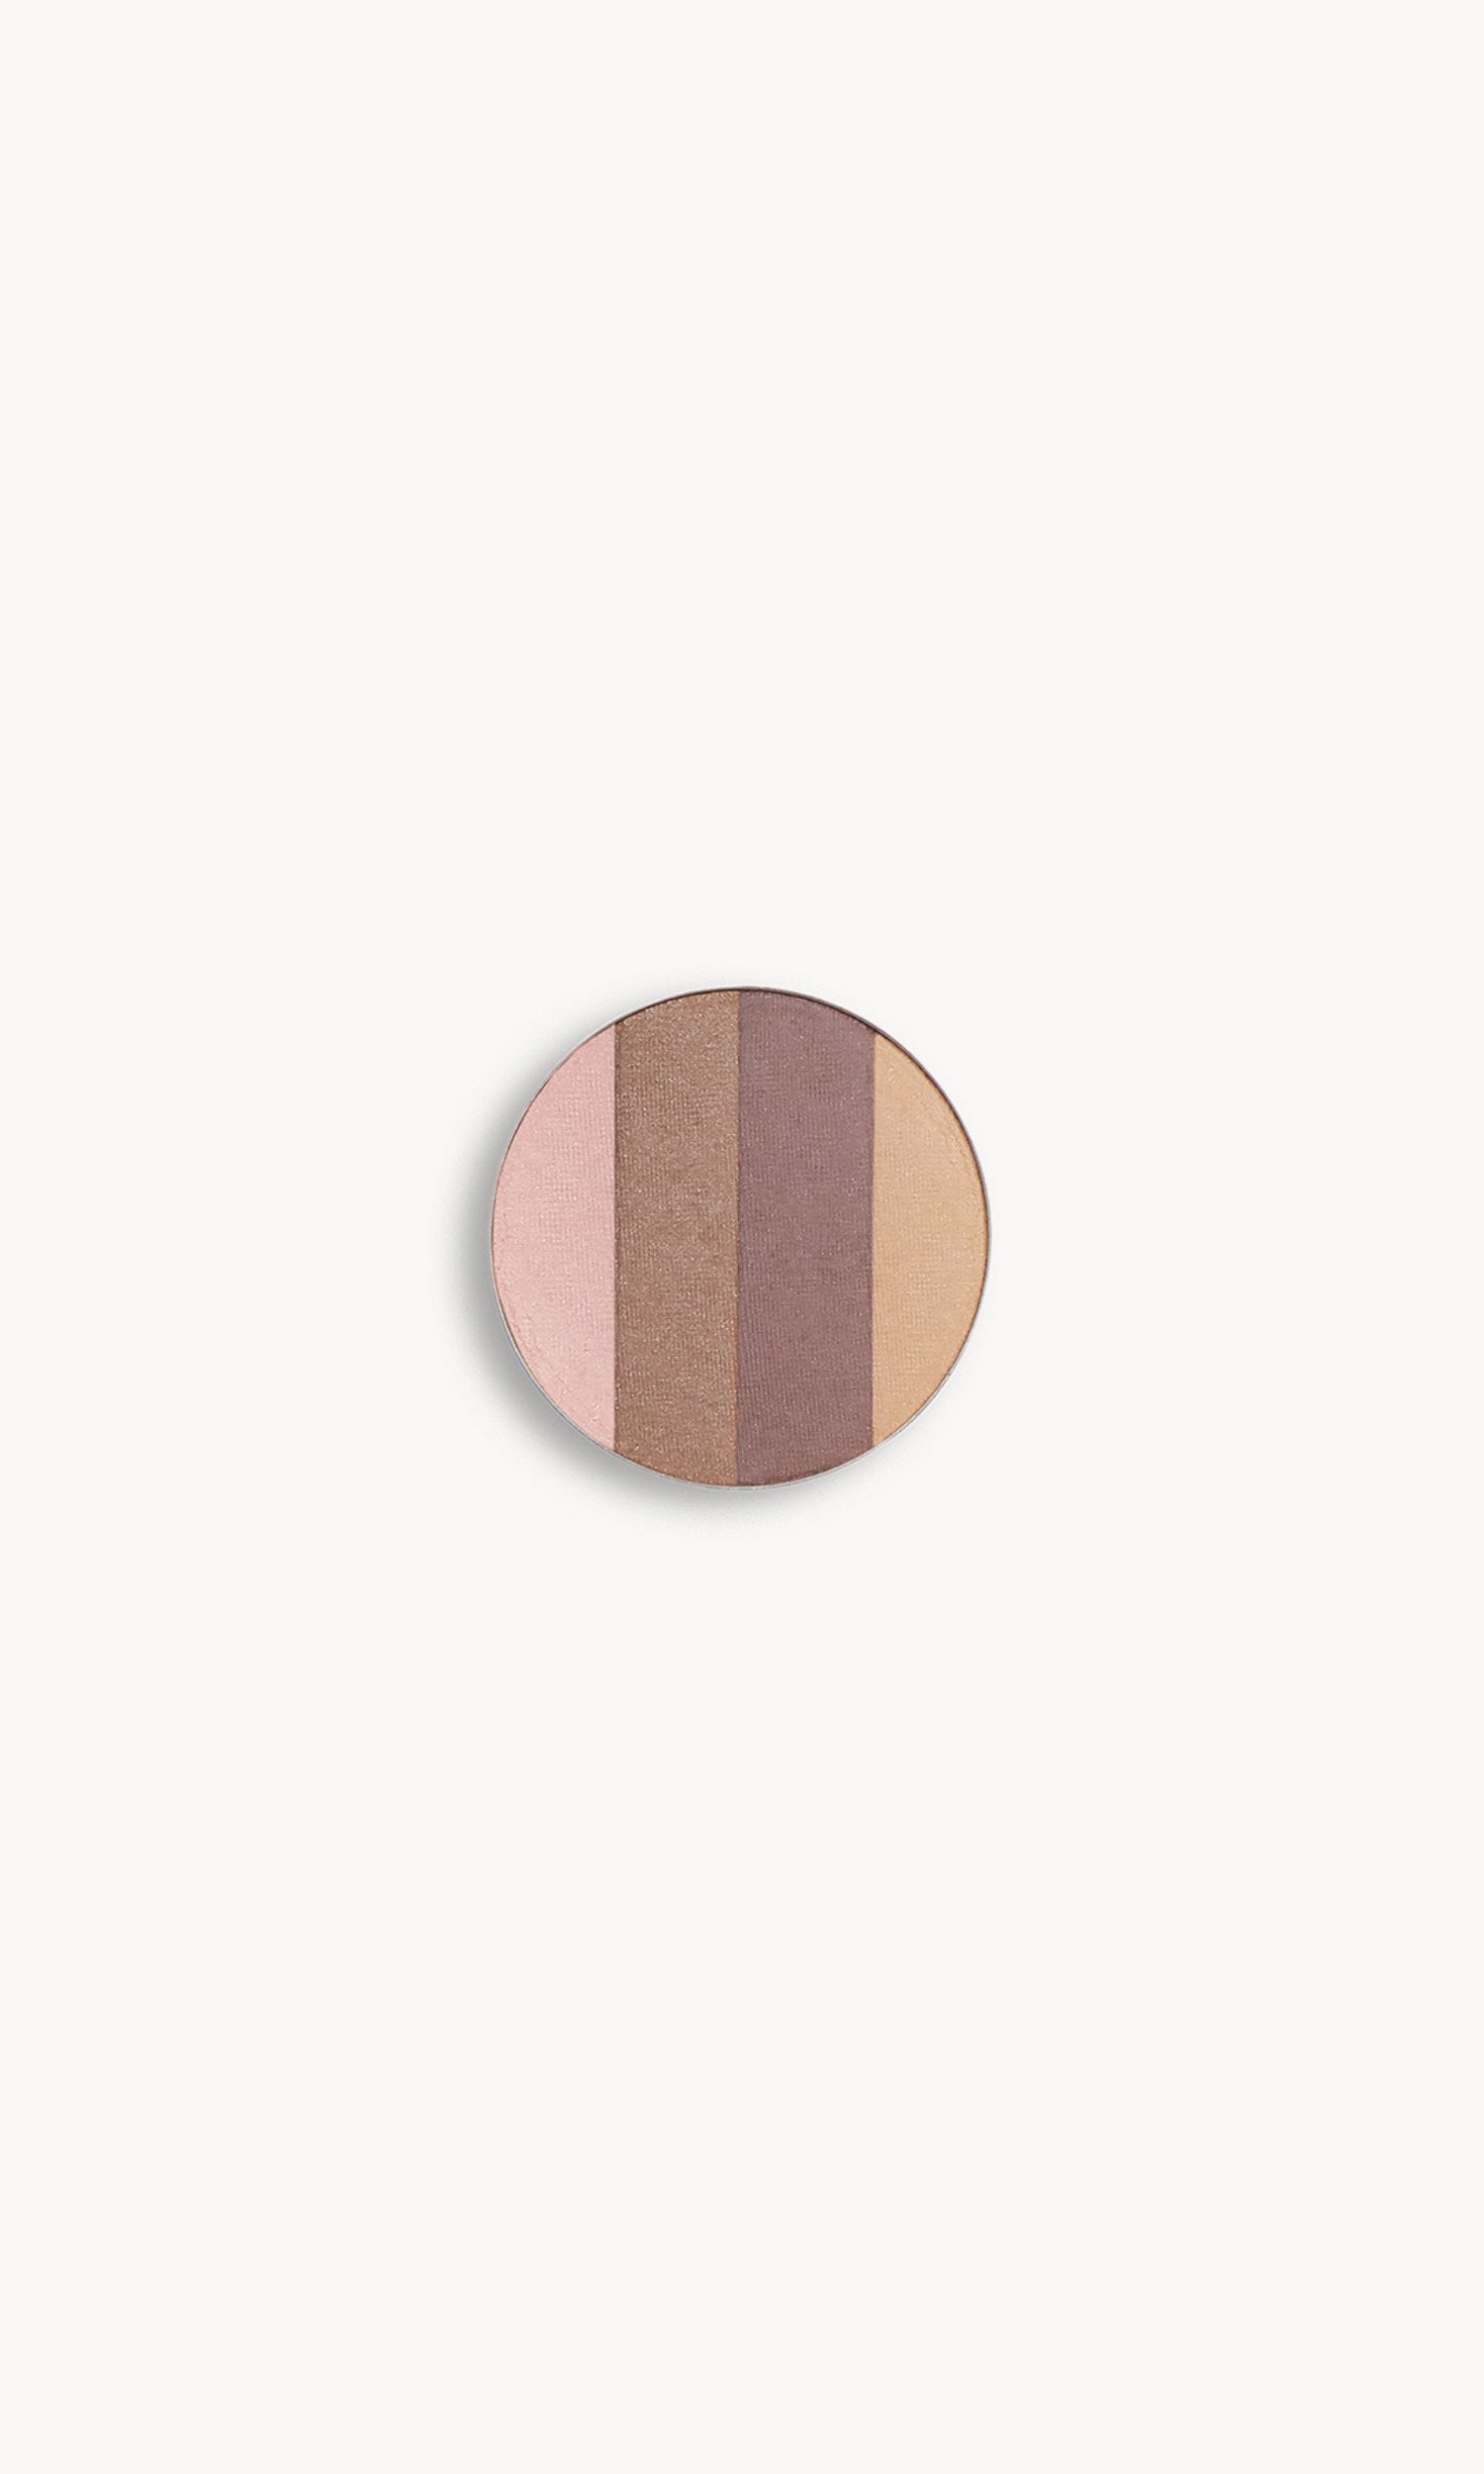 A circle of eye shadow split into four shades on a white background